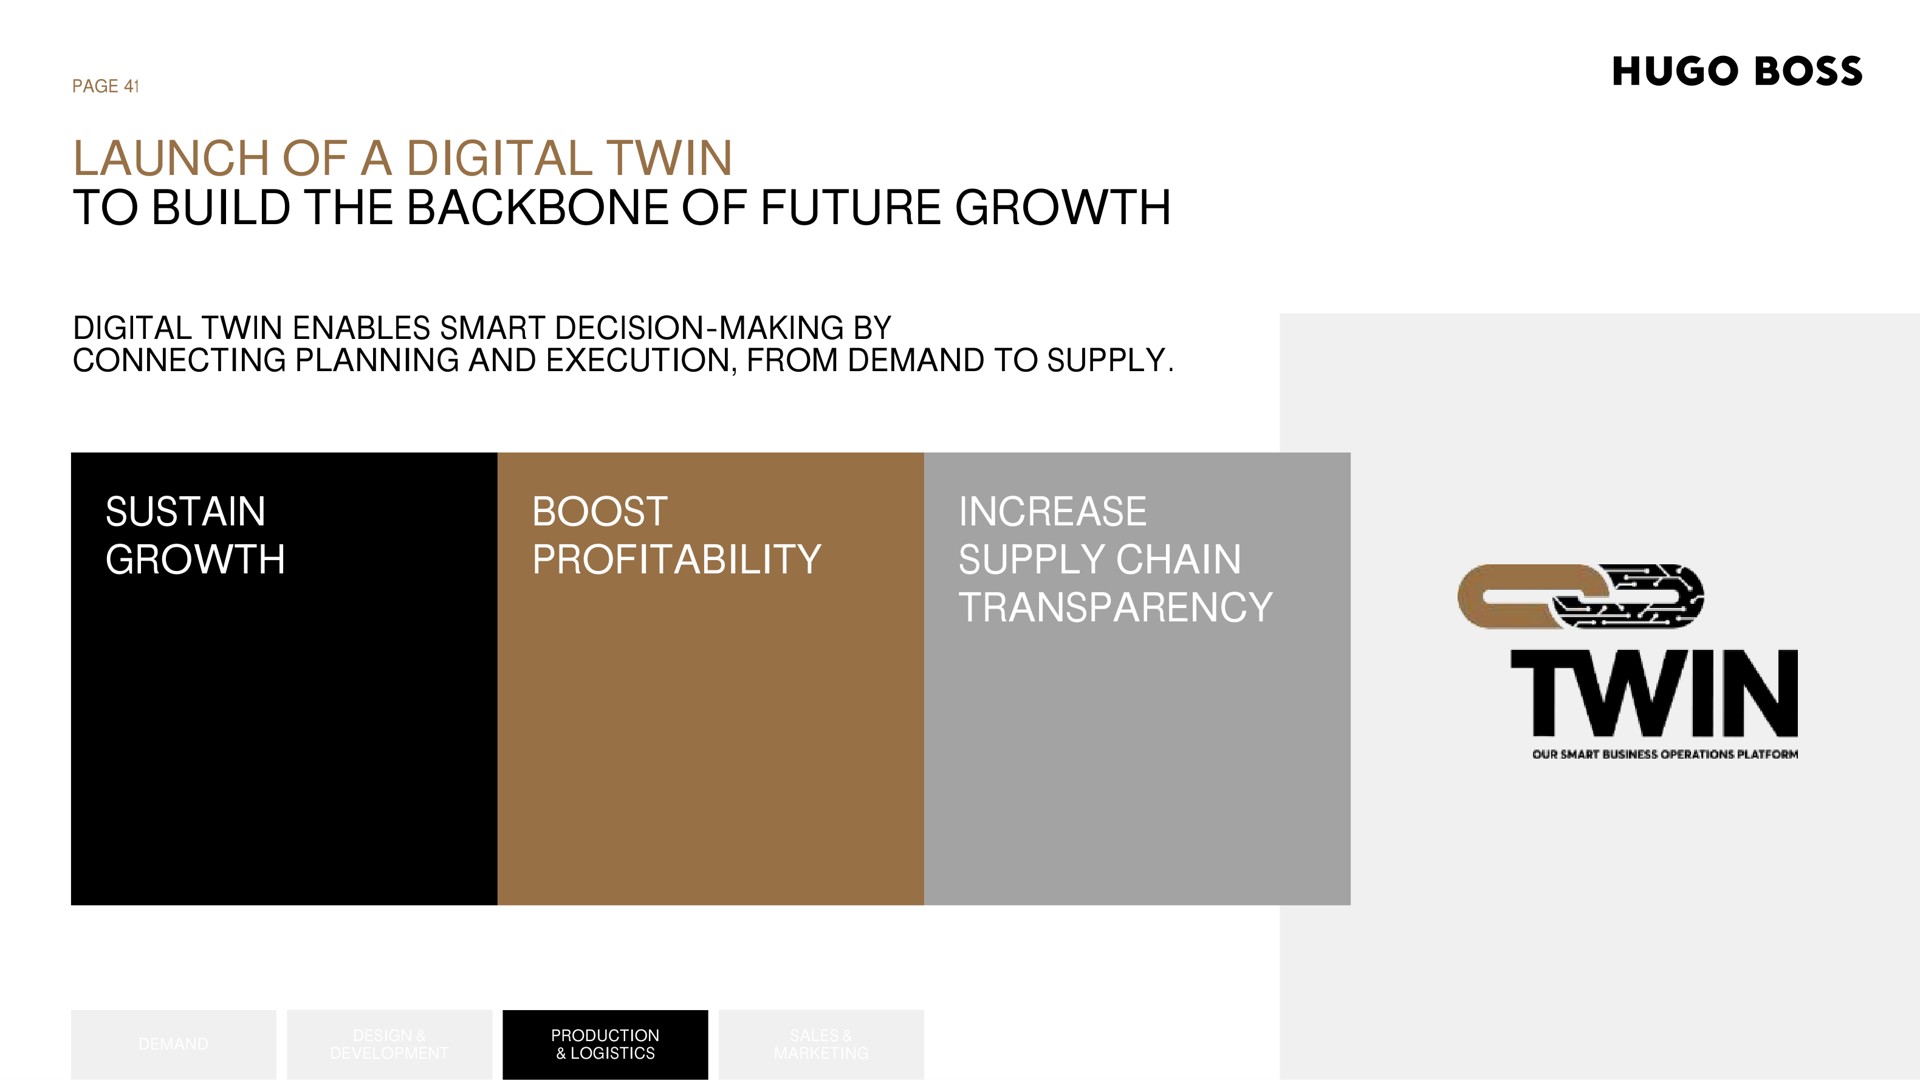 launch of a digital twin to build the backbone of future growth page boss enables smart decision making by connecting planning and execution from demand supply sustain boost profitability | Hugo Boss